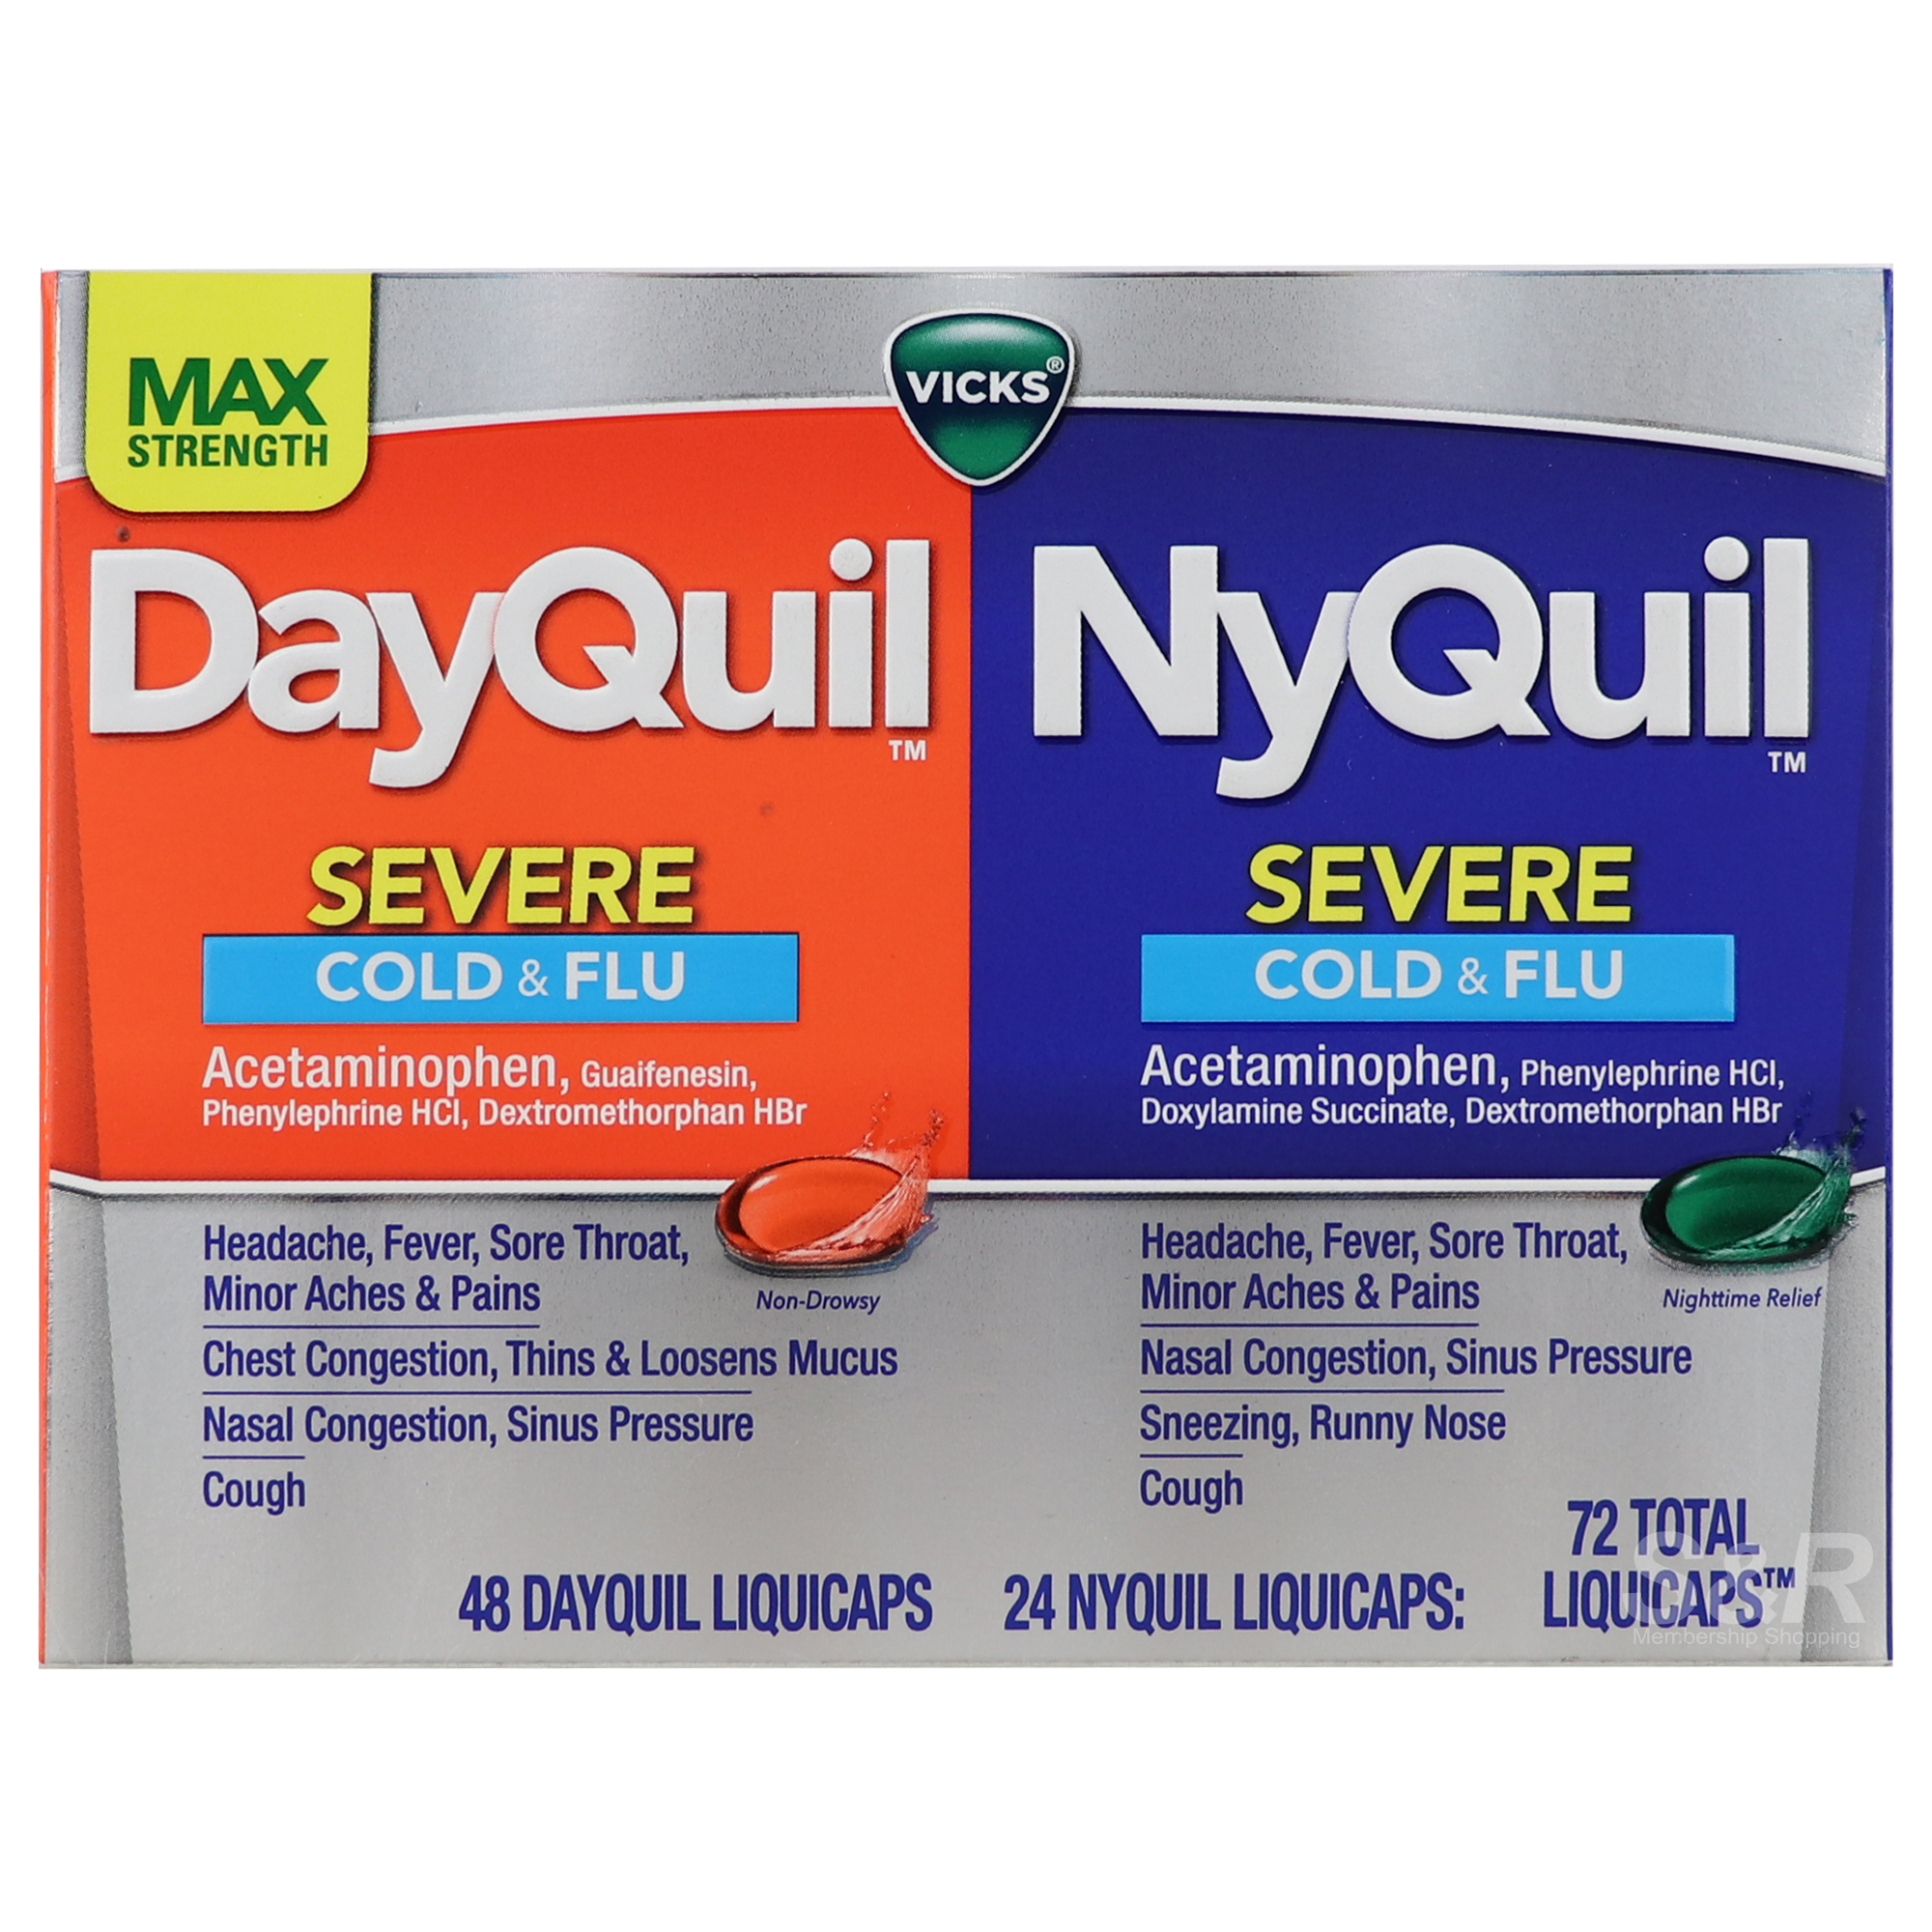 Vicks DayQuil and NyQuil 72 Liquicaps